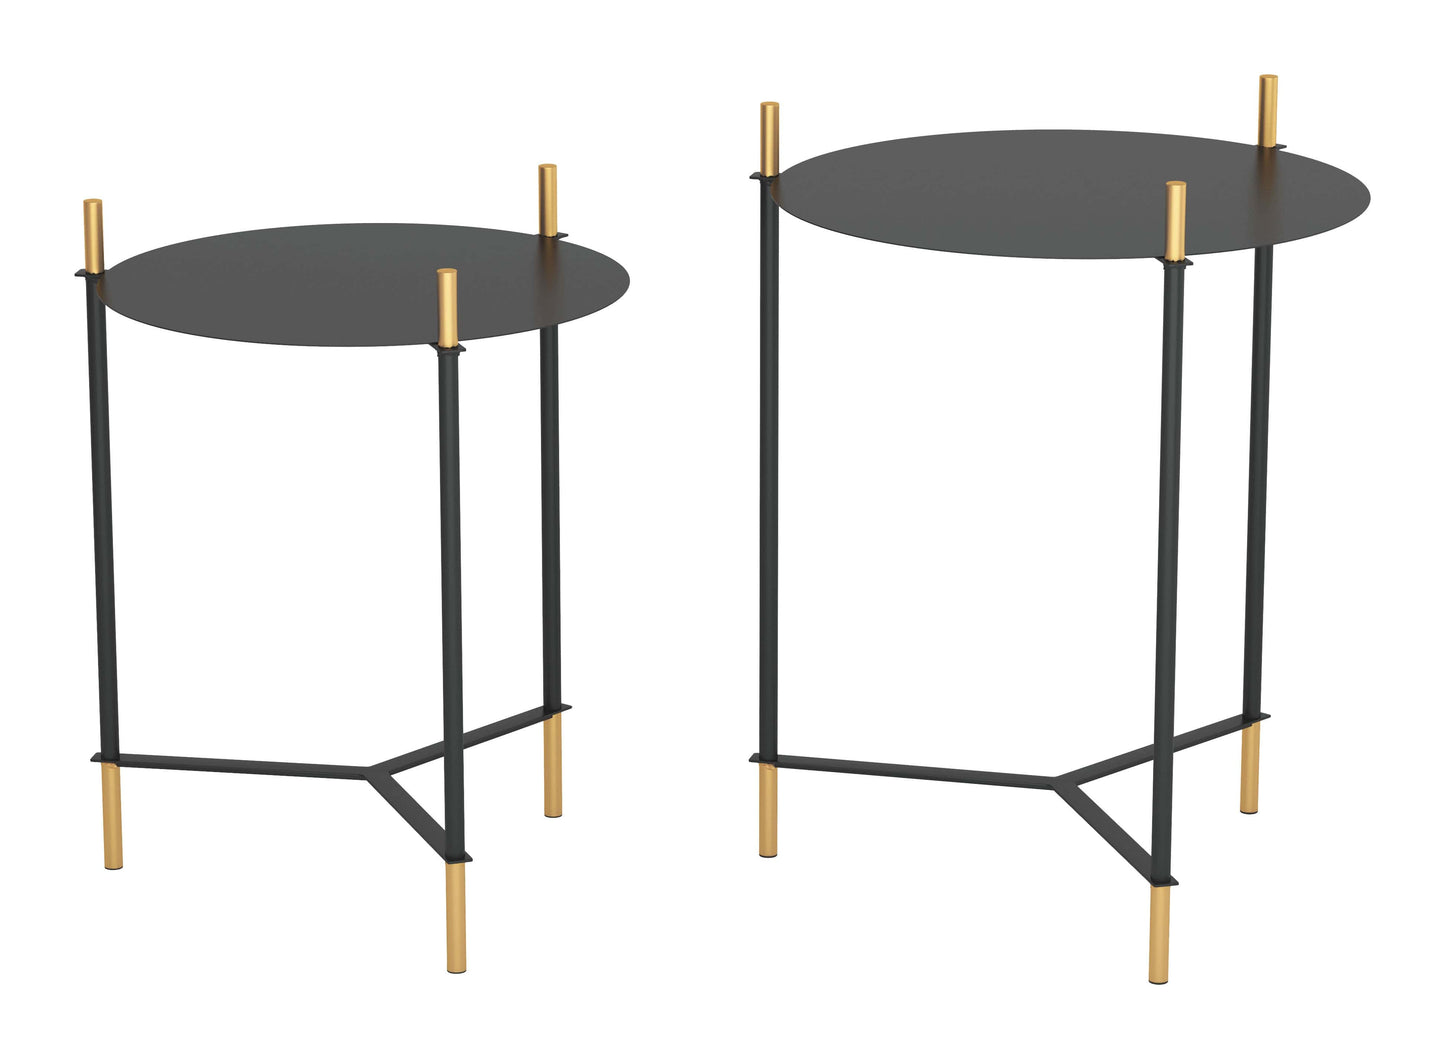 Matching end tables in black & gold